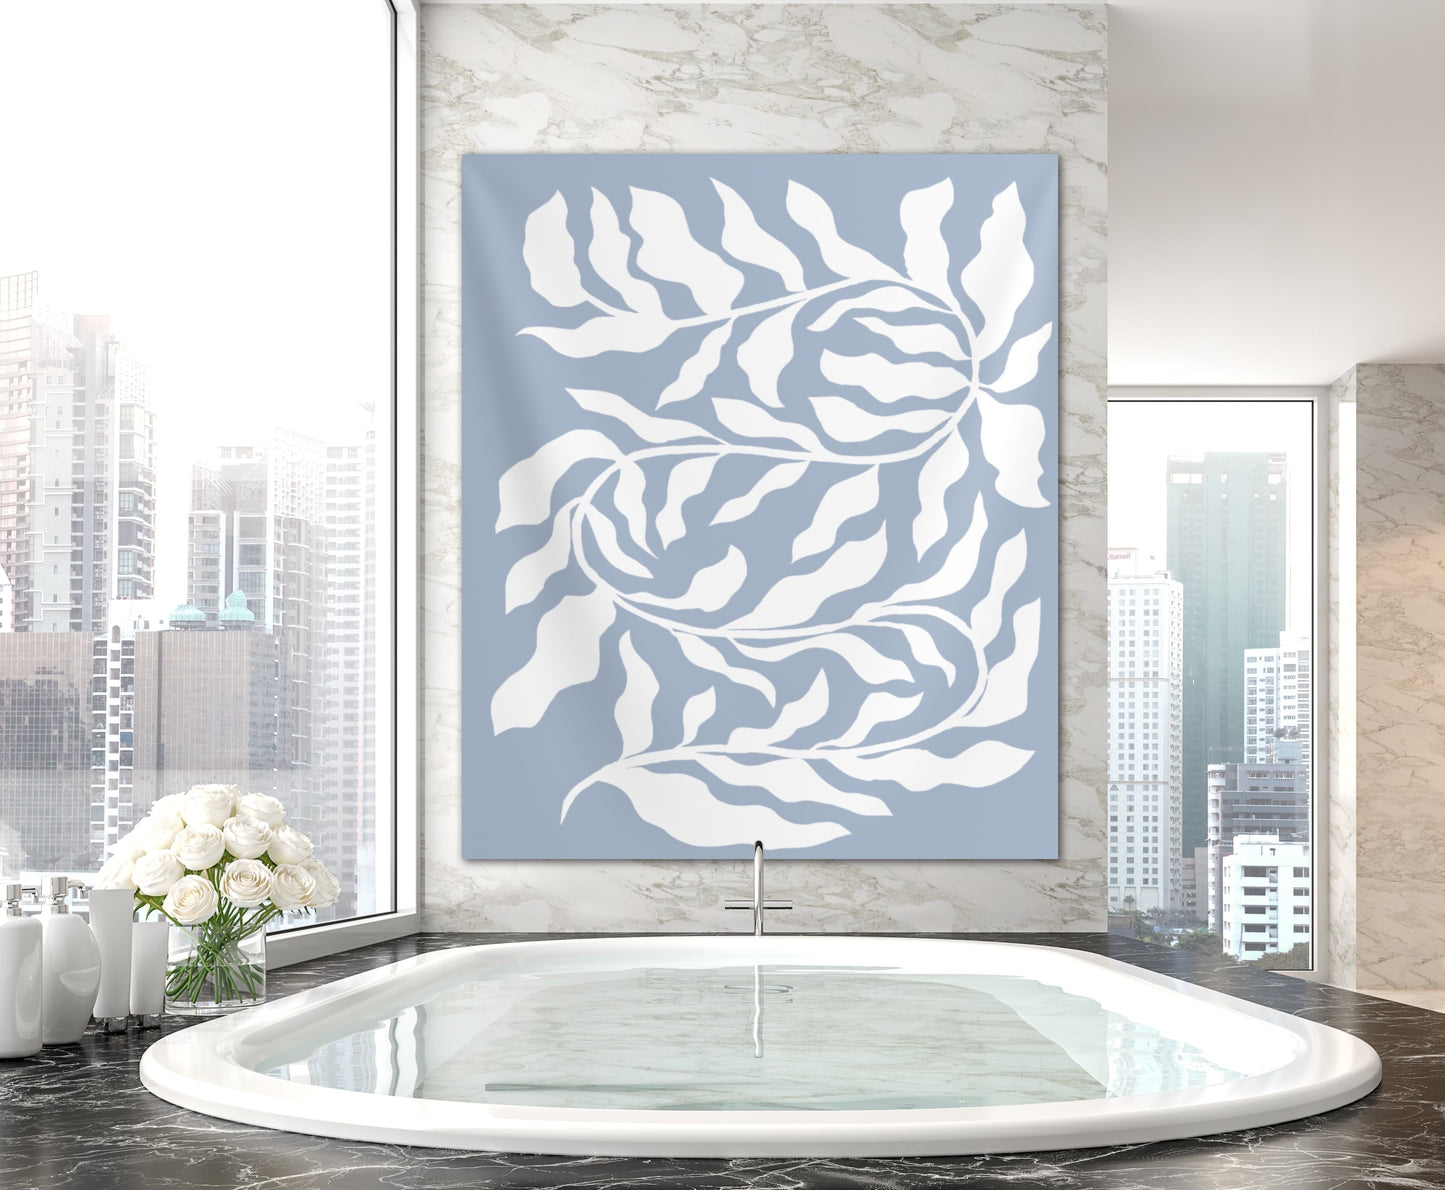 Periwinkle Wall Tapestry